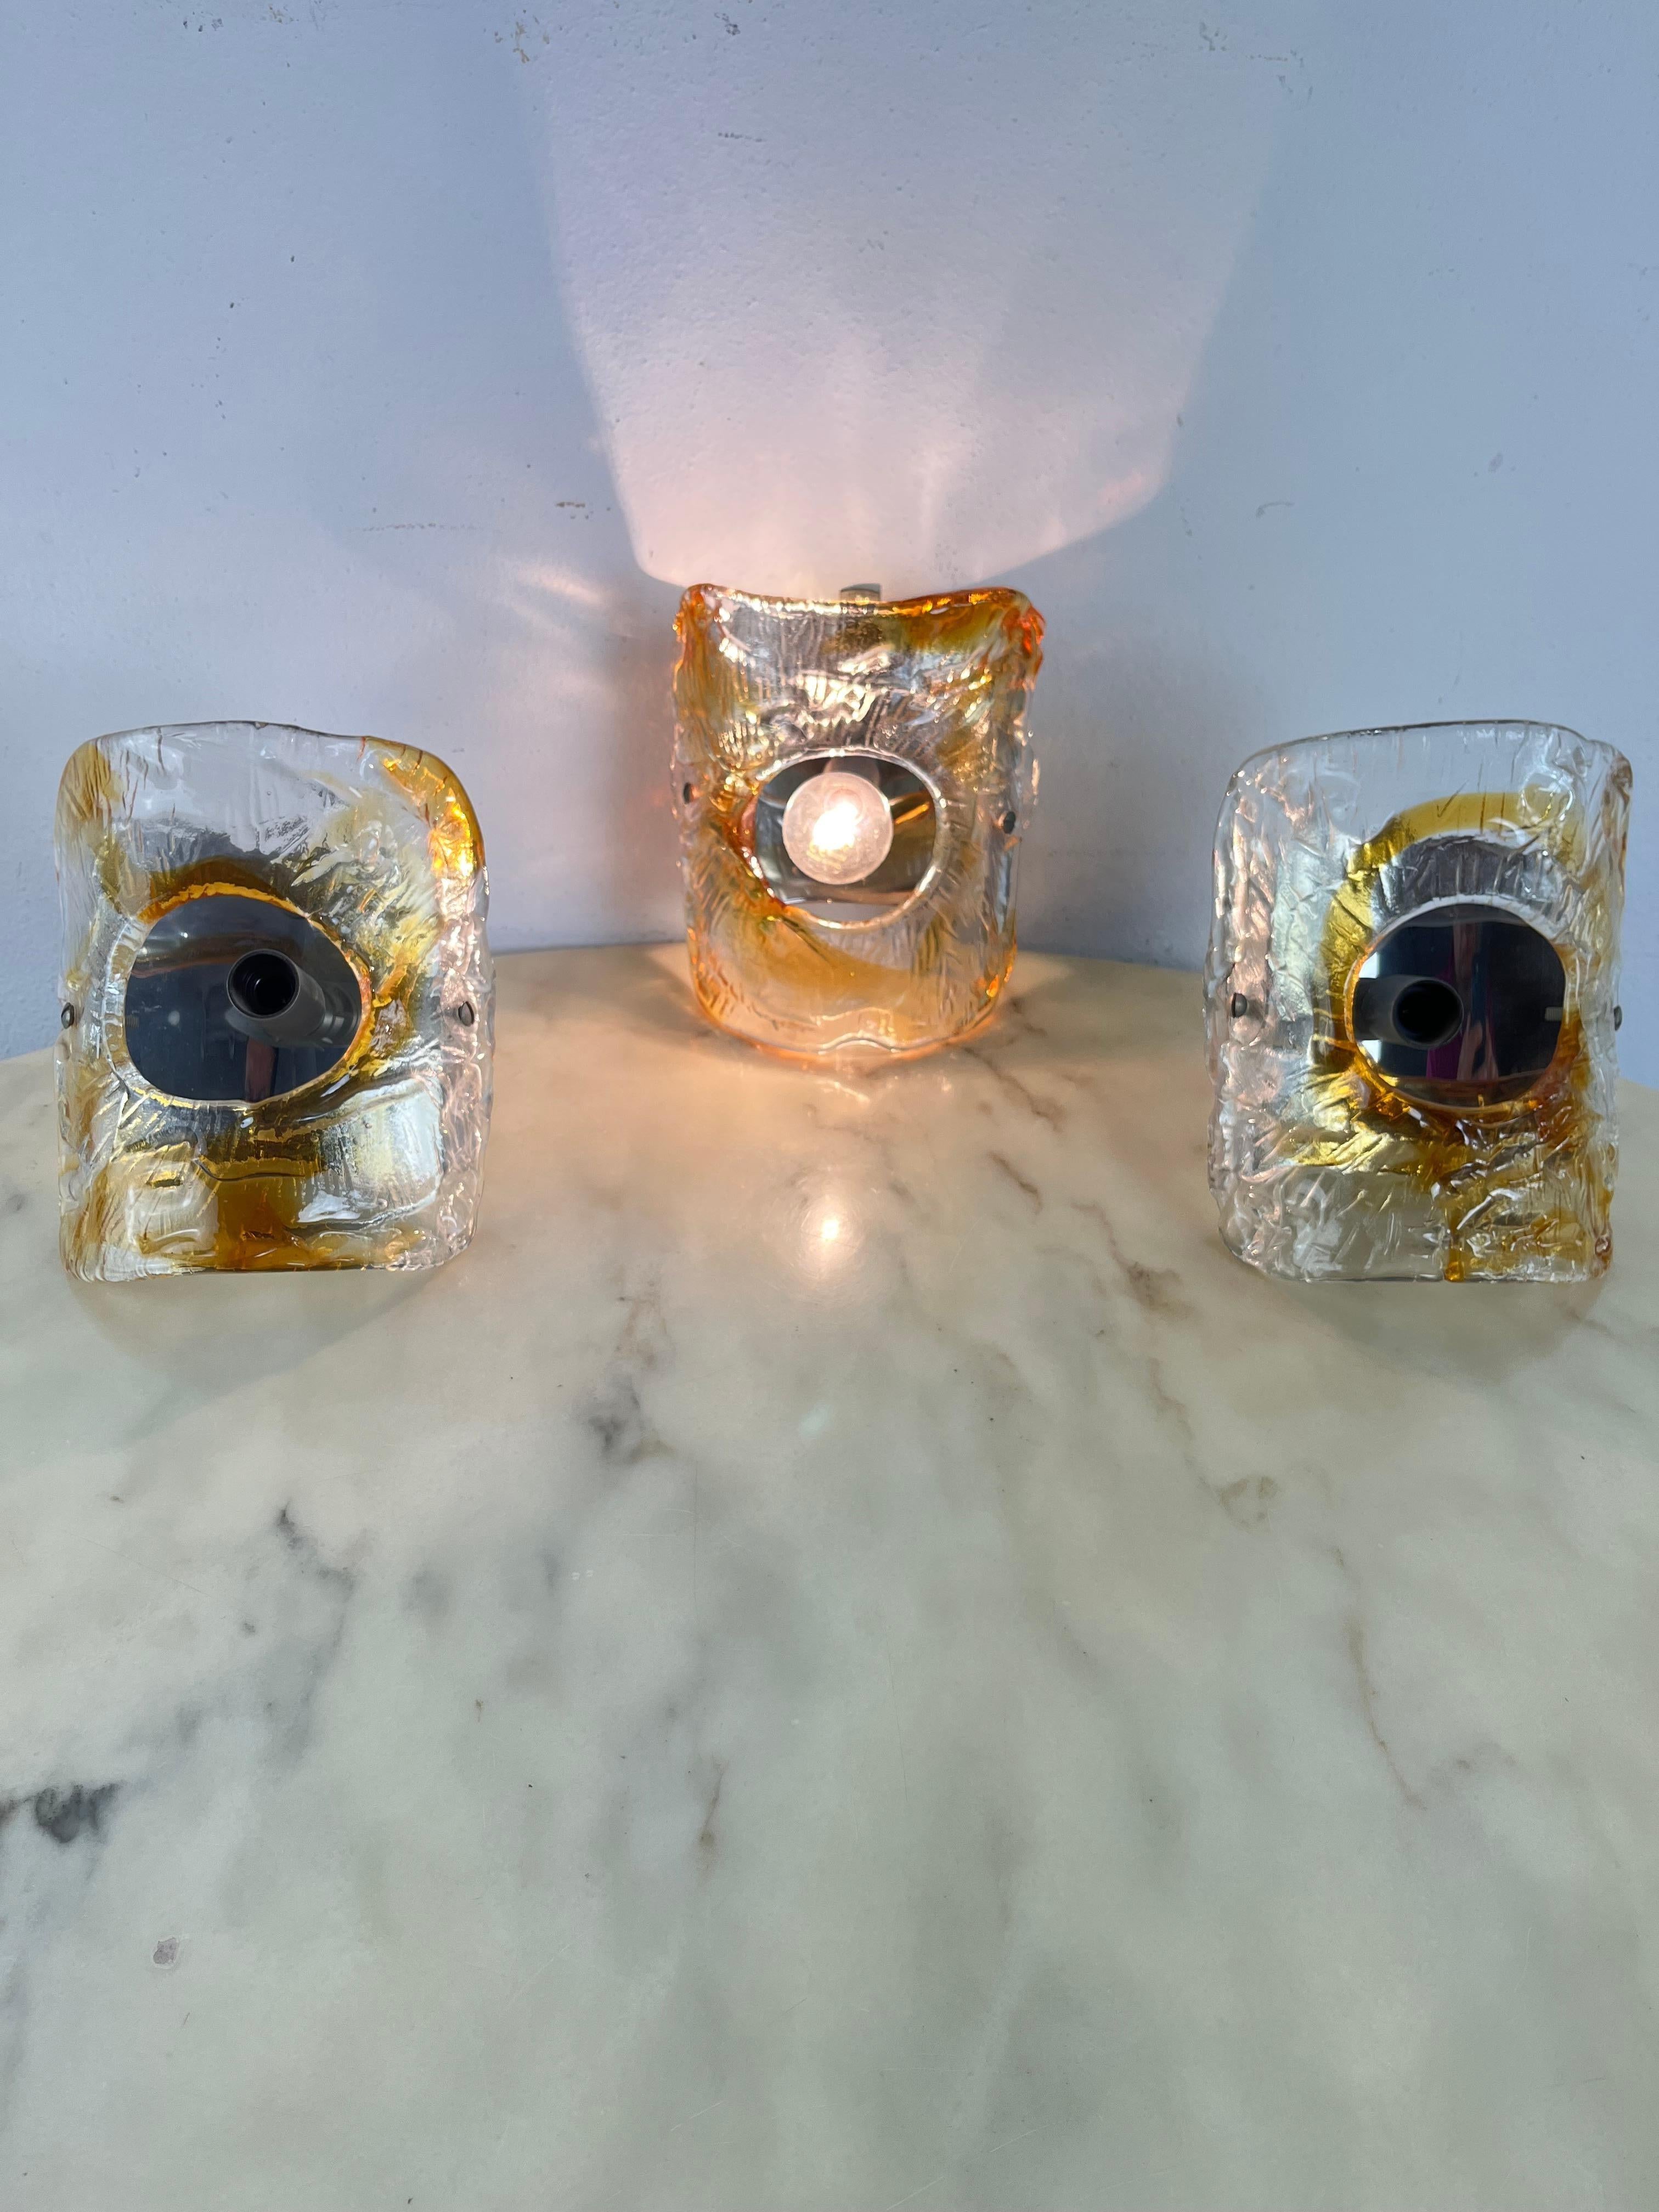 Set of 3 Mid-Century Murano Glass Wall Lamps Attributed to Mazzega 1960s
Metal structure, E14 lamps. Intact and functional, good condition.

We guarantee adequate packaging and will ship via DHL, insuring the contents against any breakage or loss of